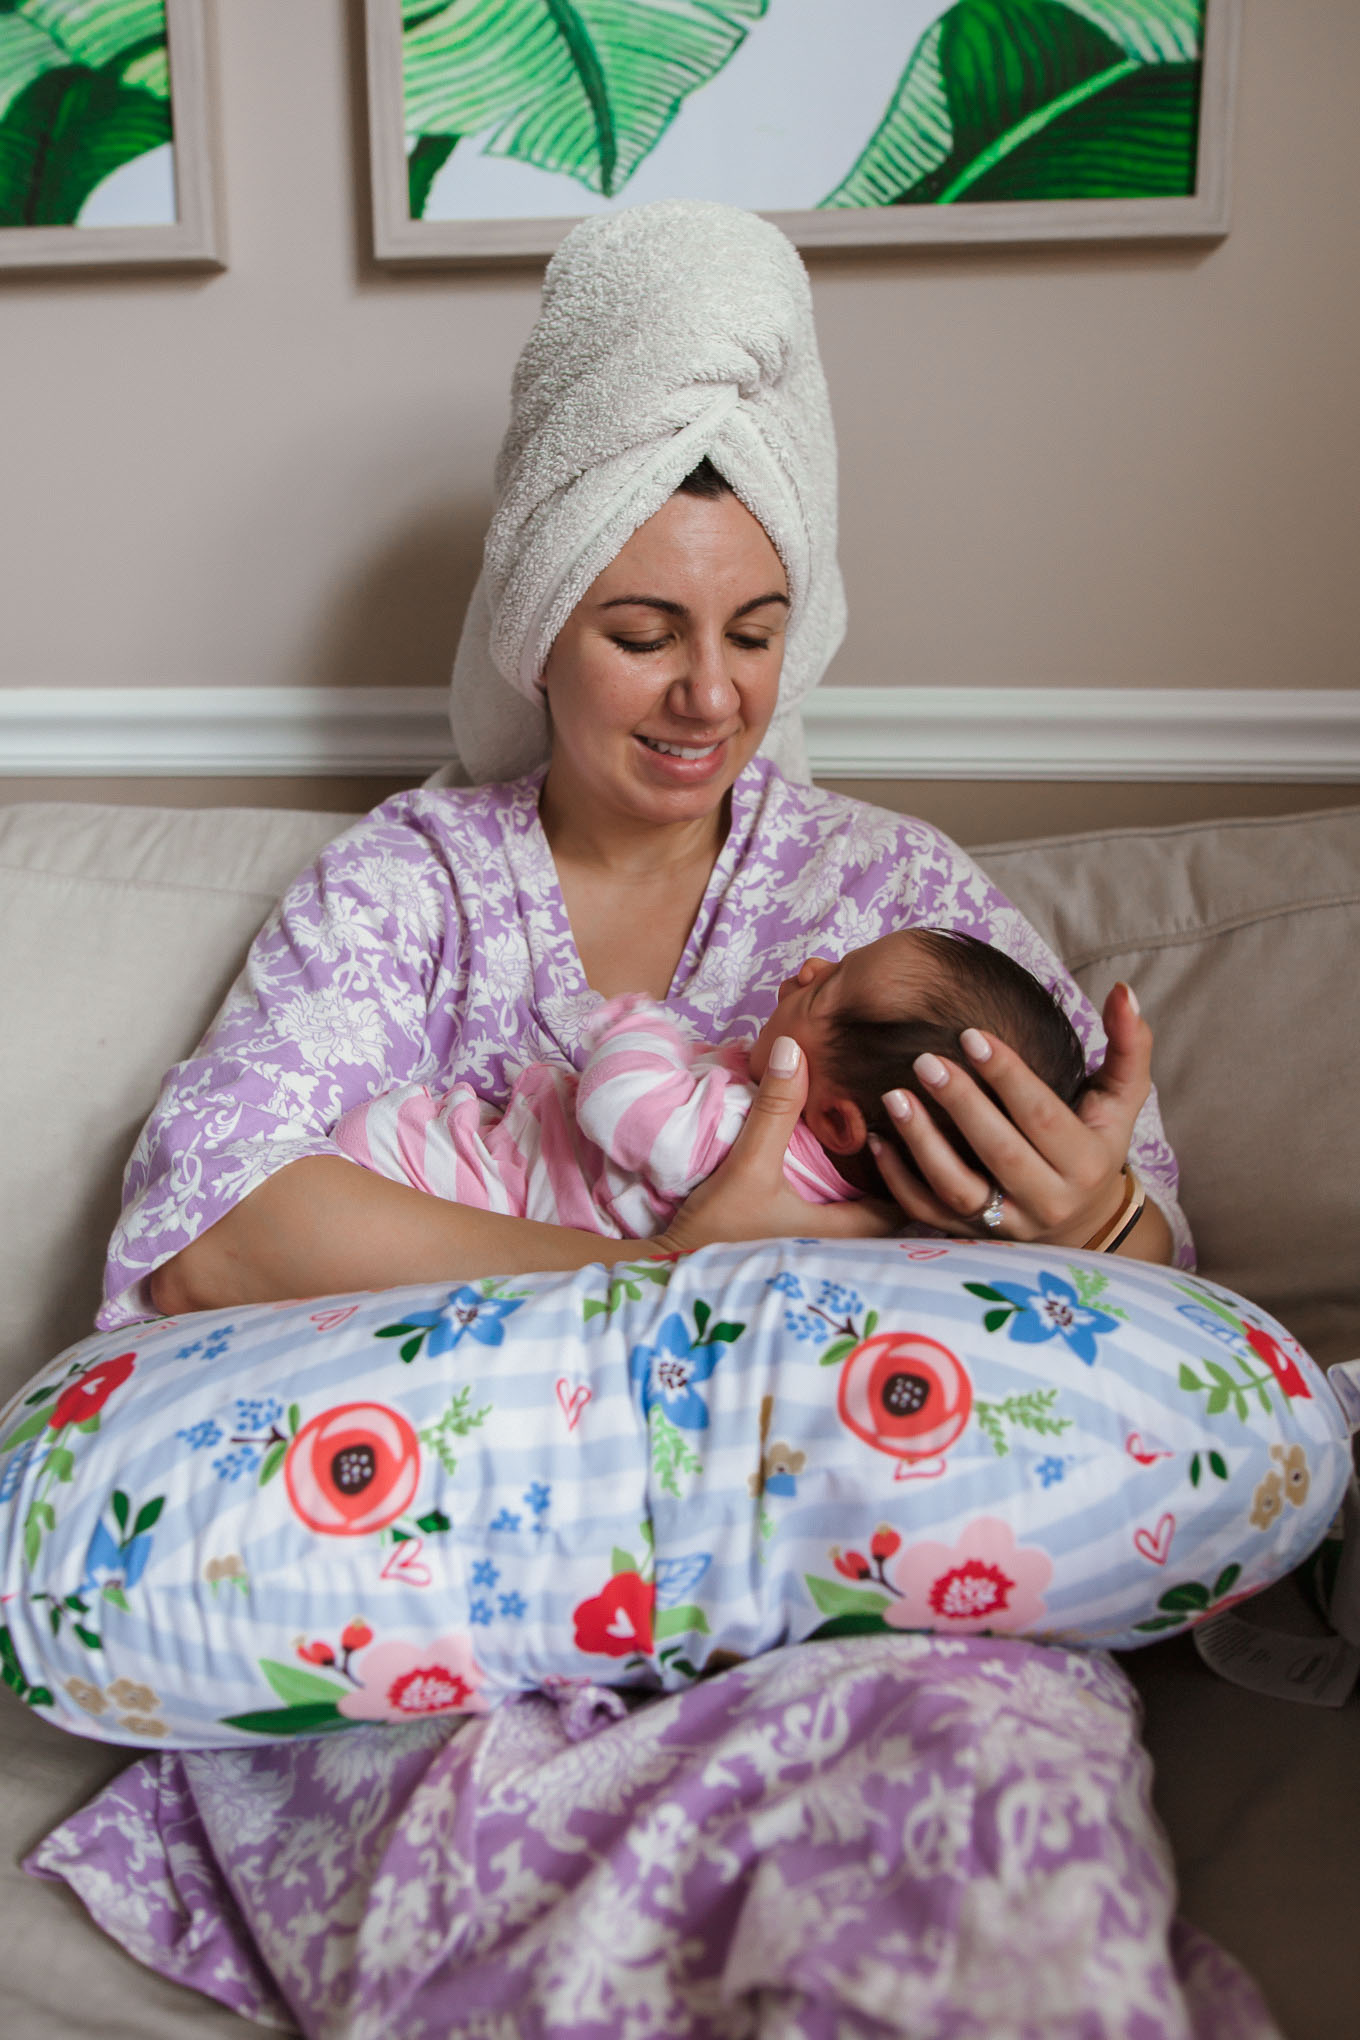 My 10 Breastfeeding Essentials by popular mommy blog, Glass of Glam: image of a woman wearing a purple and white floral robe and holding her baby on a Boppy Pillow.